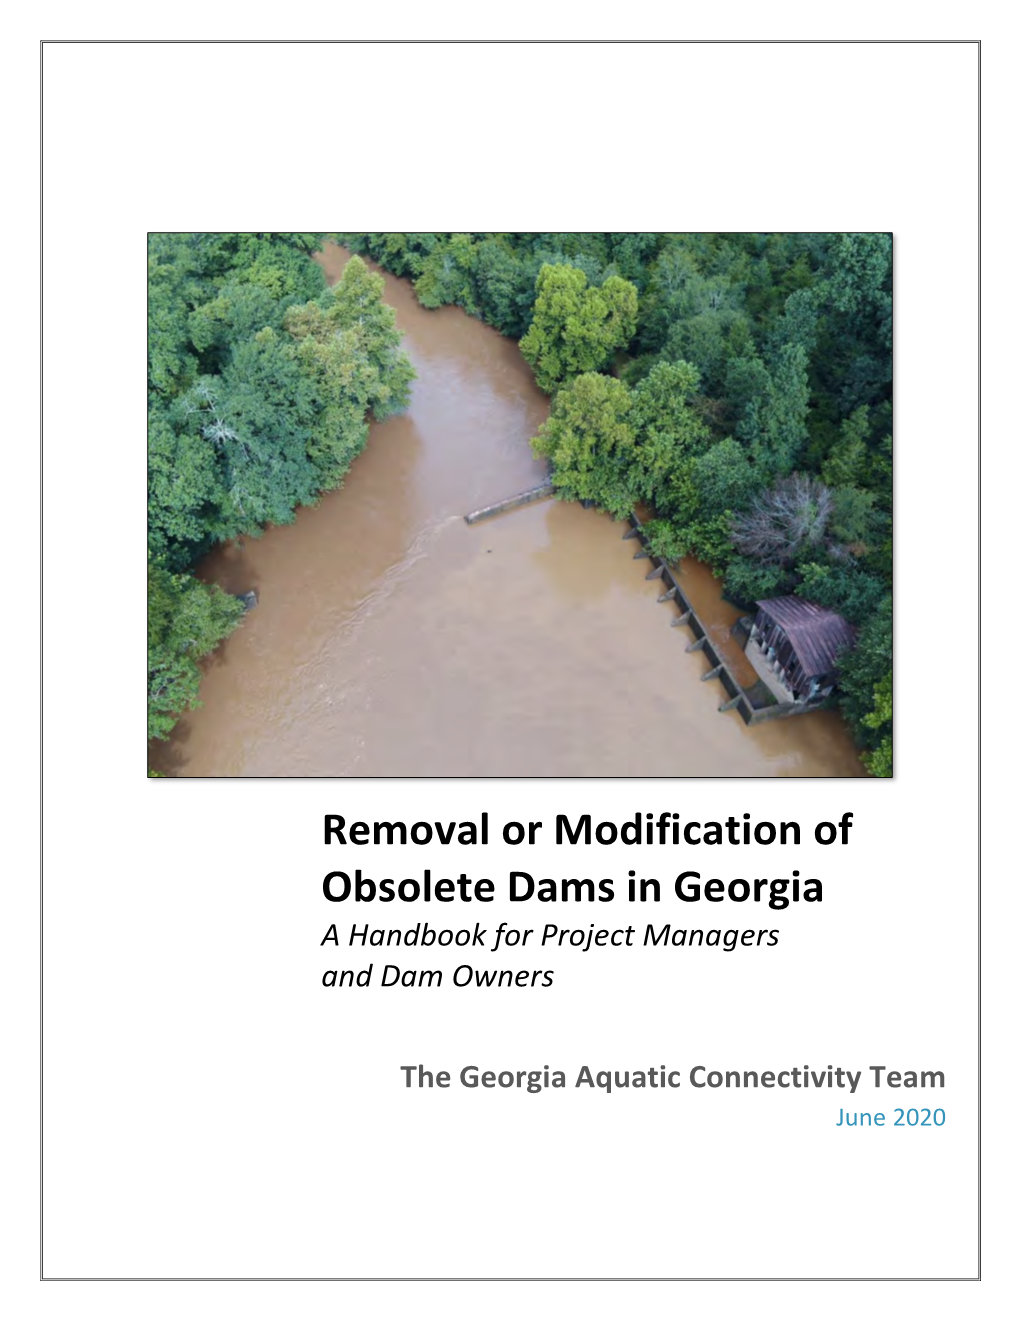 Removal Or Modification of Obsolete Dams in Georgia a Handbook for Project Managers and Dam Owners